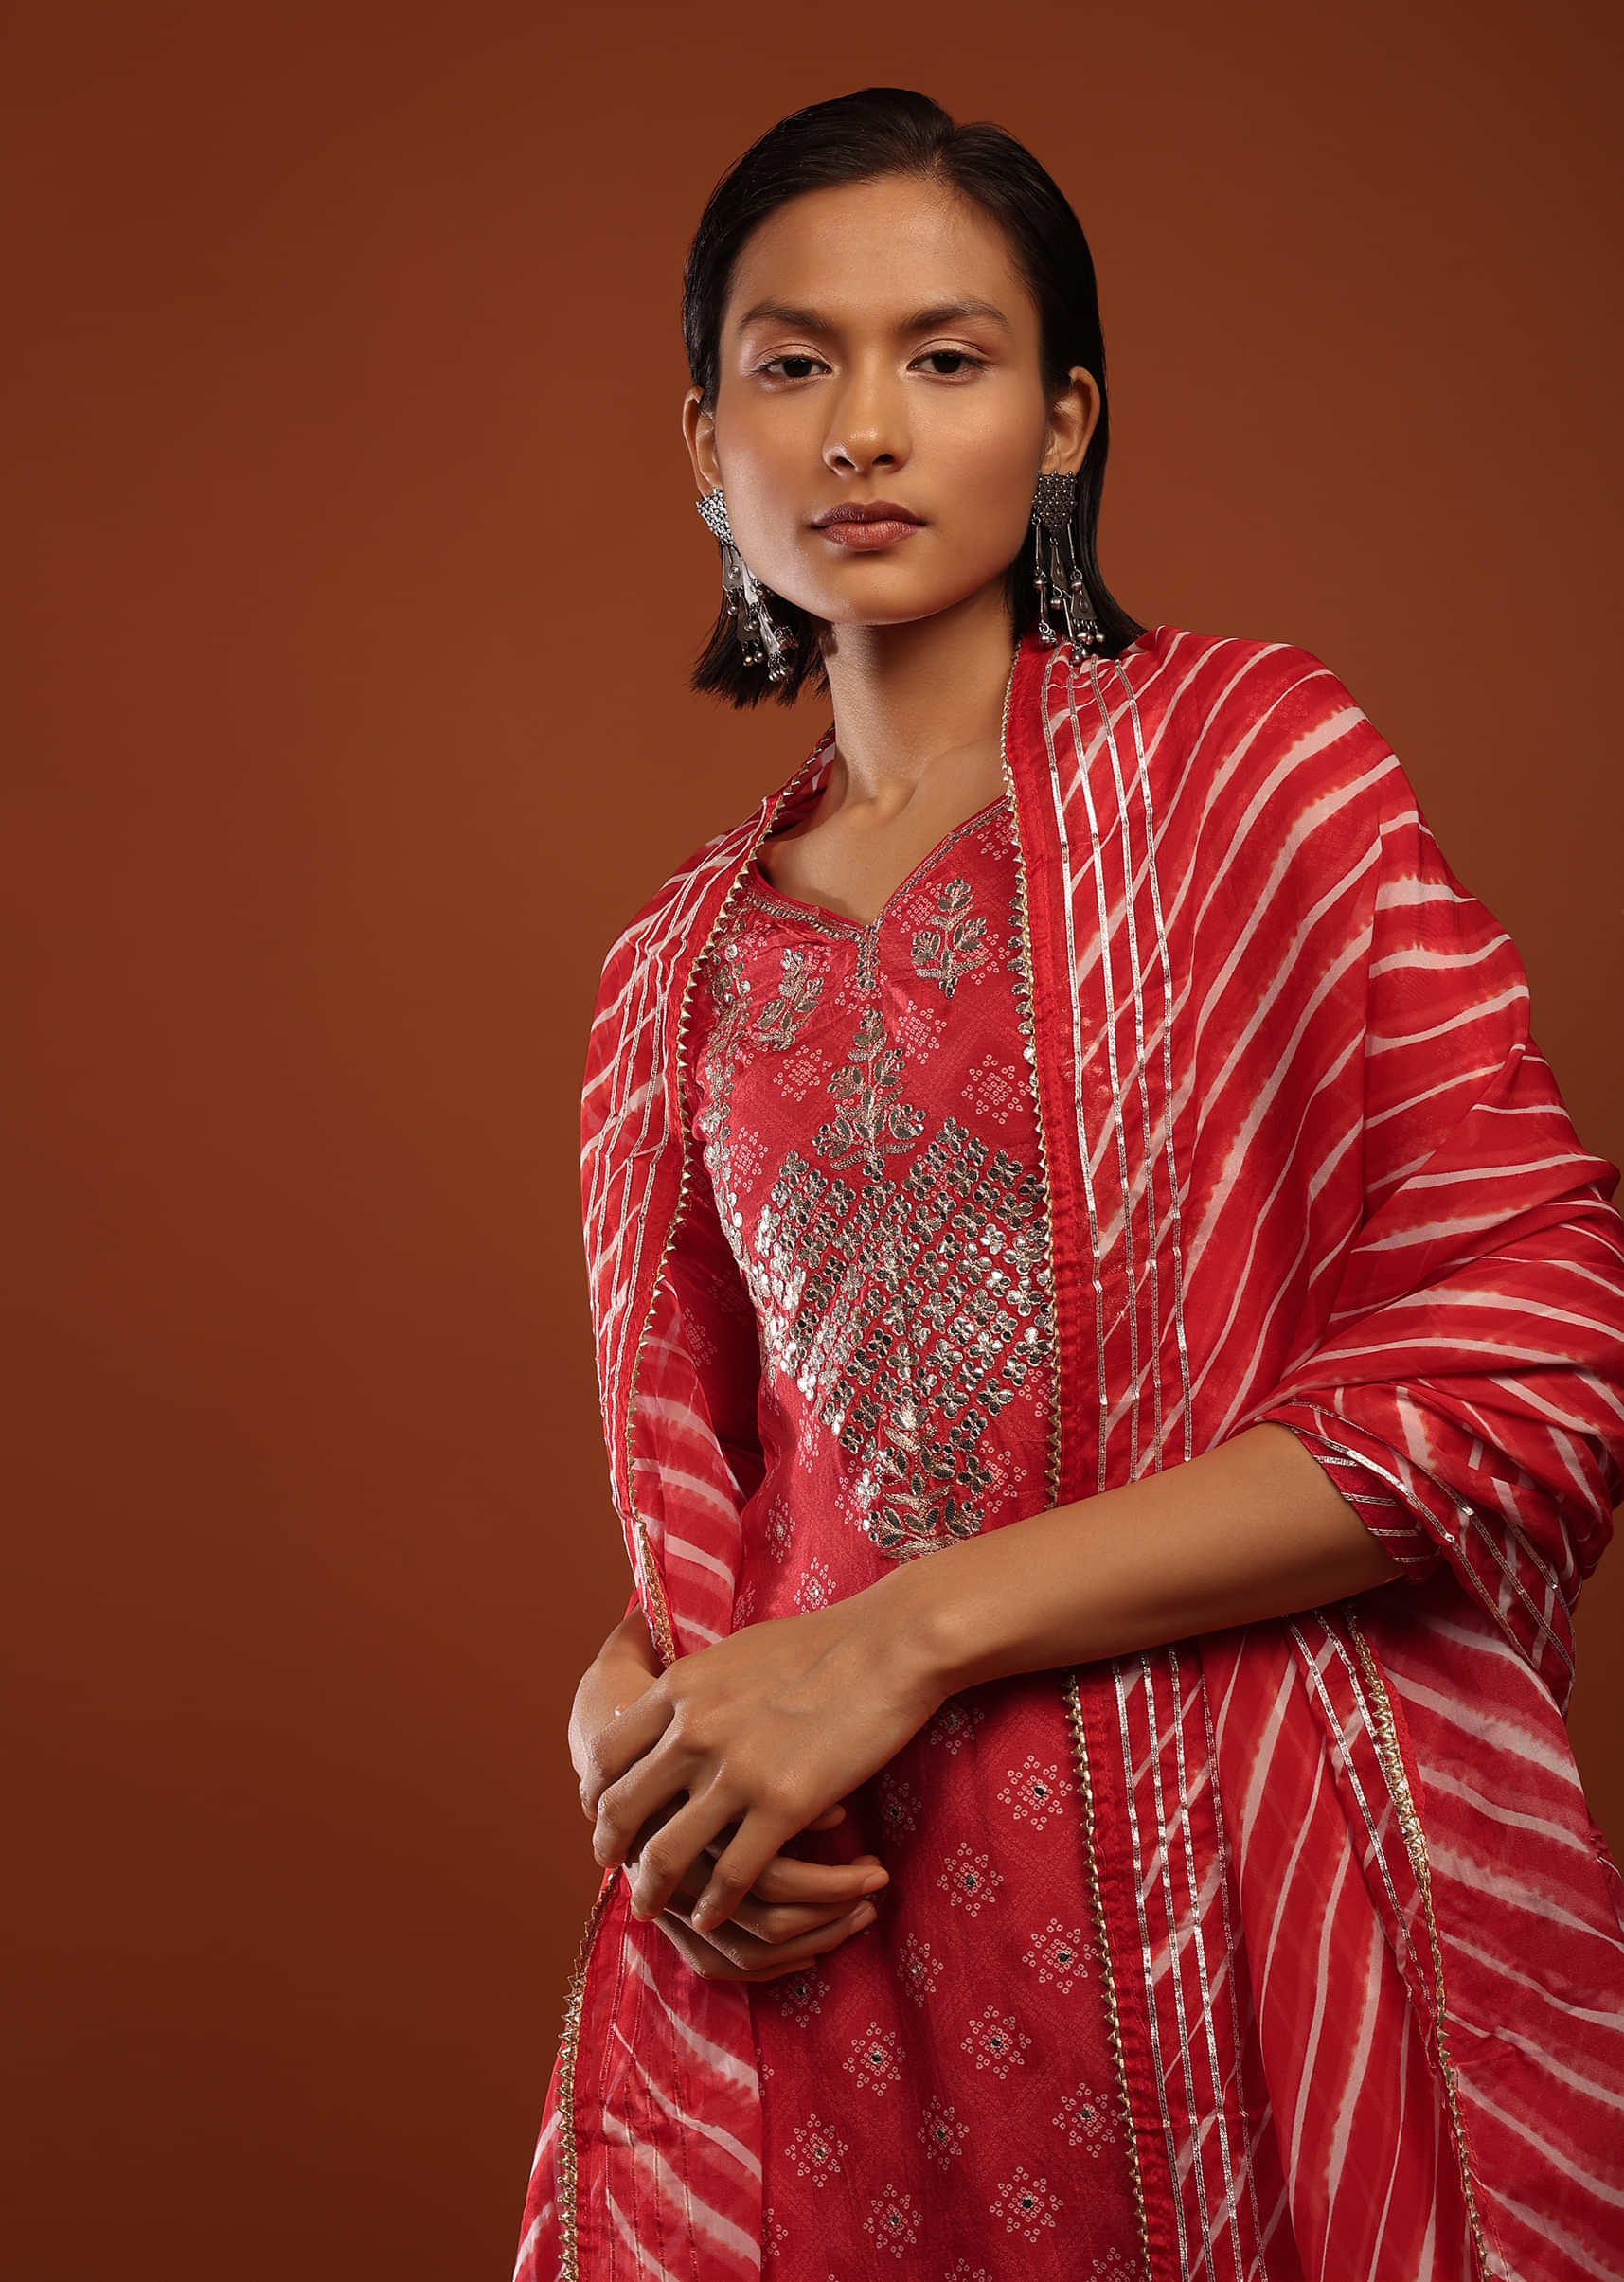 Fiery Red Straight Cut Palazzo Suit With Bandhani Print And Gotta Patti Embrodiered Yoke Design